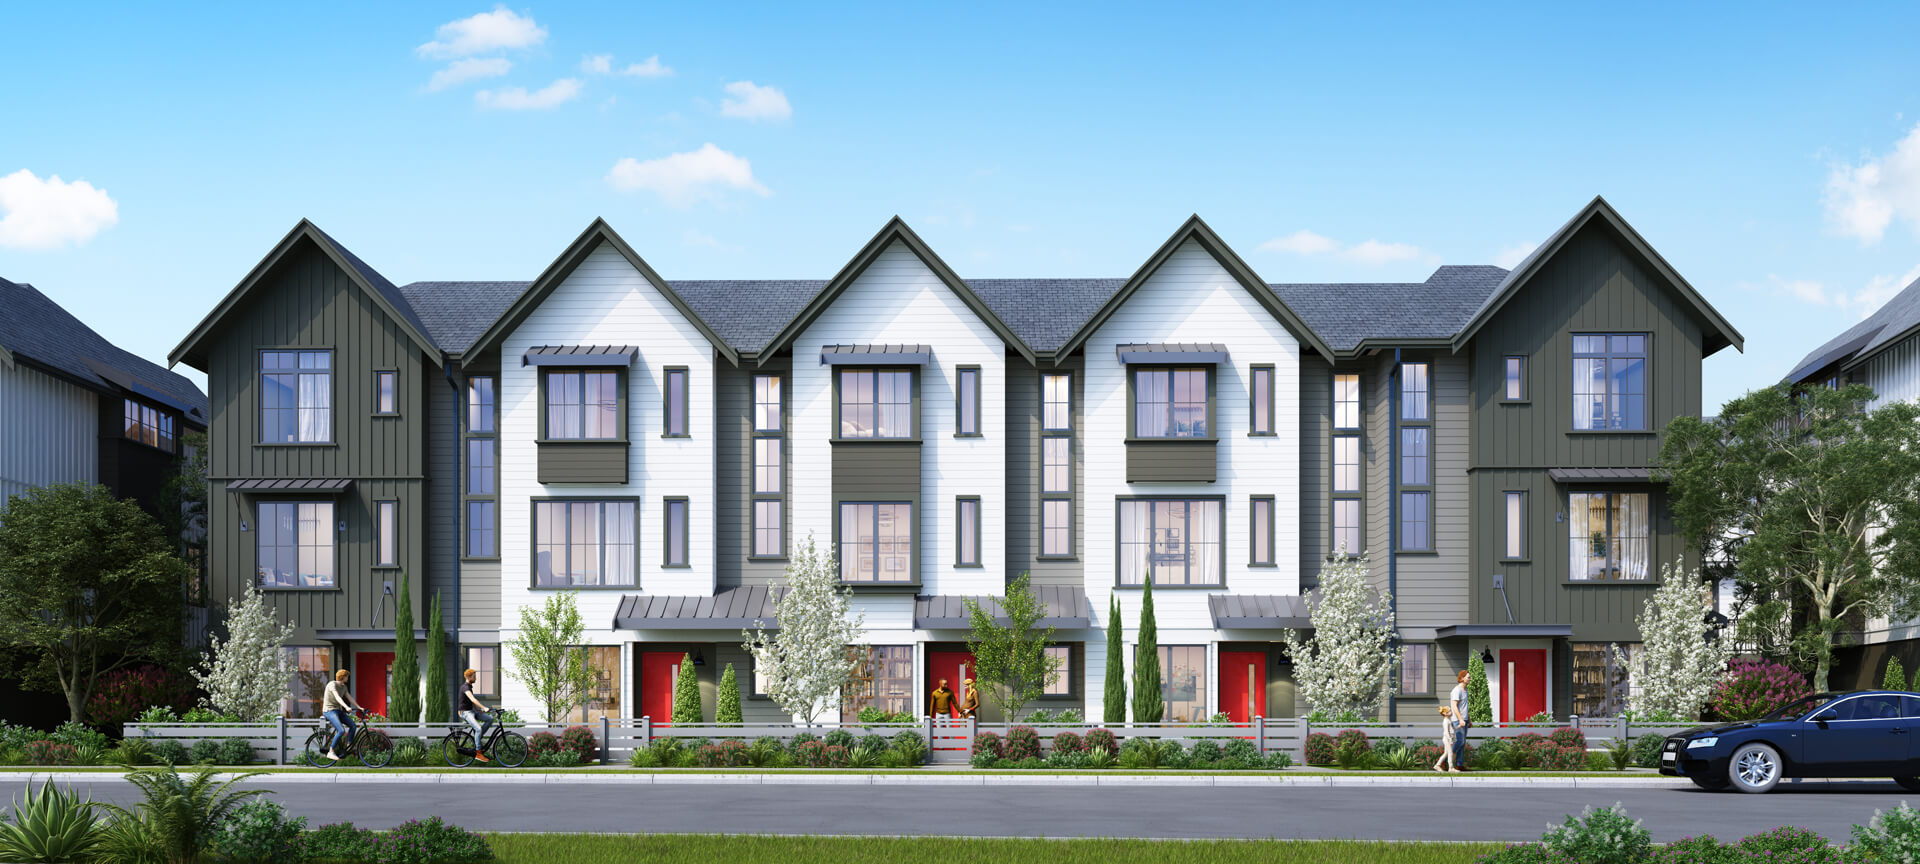 Glenpark Row II Townhomes by VanMar – Prices, Plans, Availability